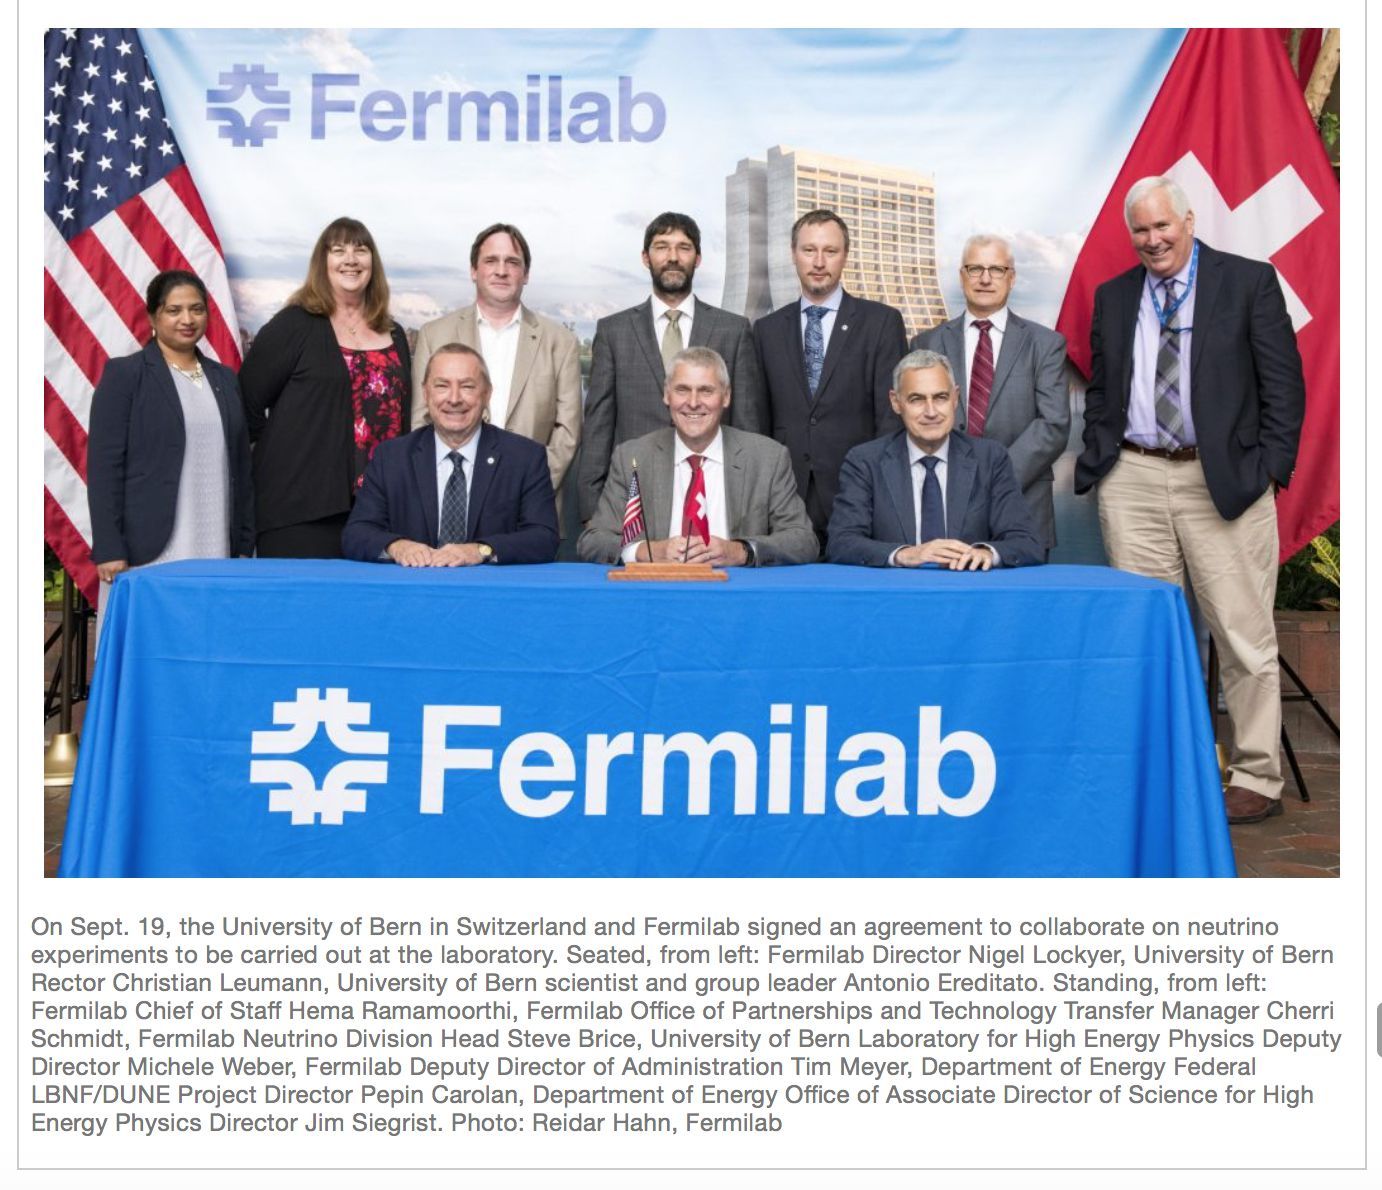 Fermilab and University of Bern join forces for neutrino physics